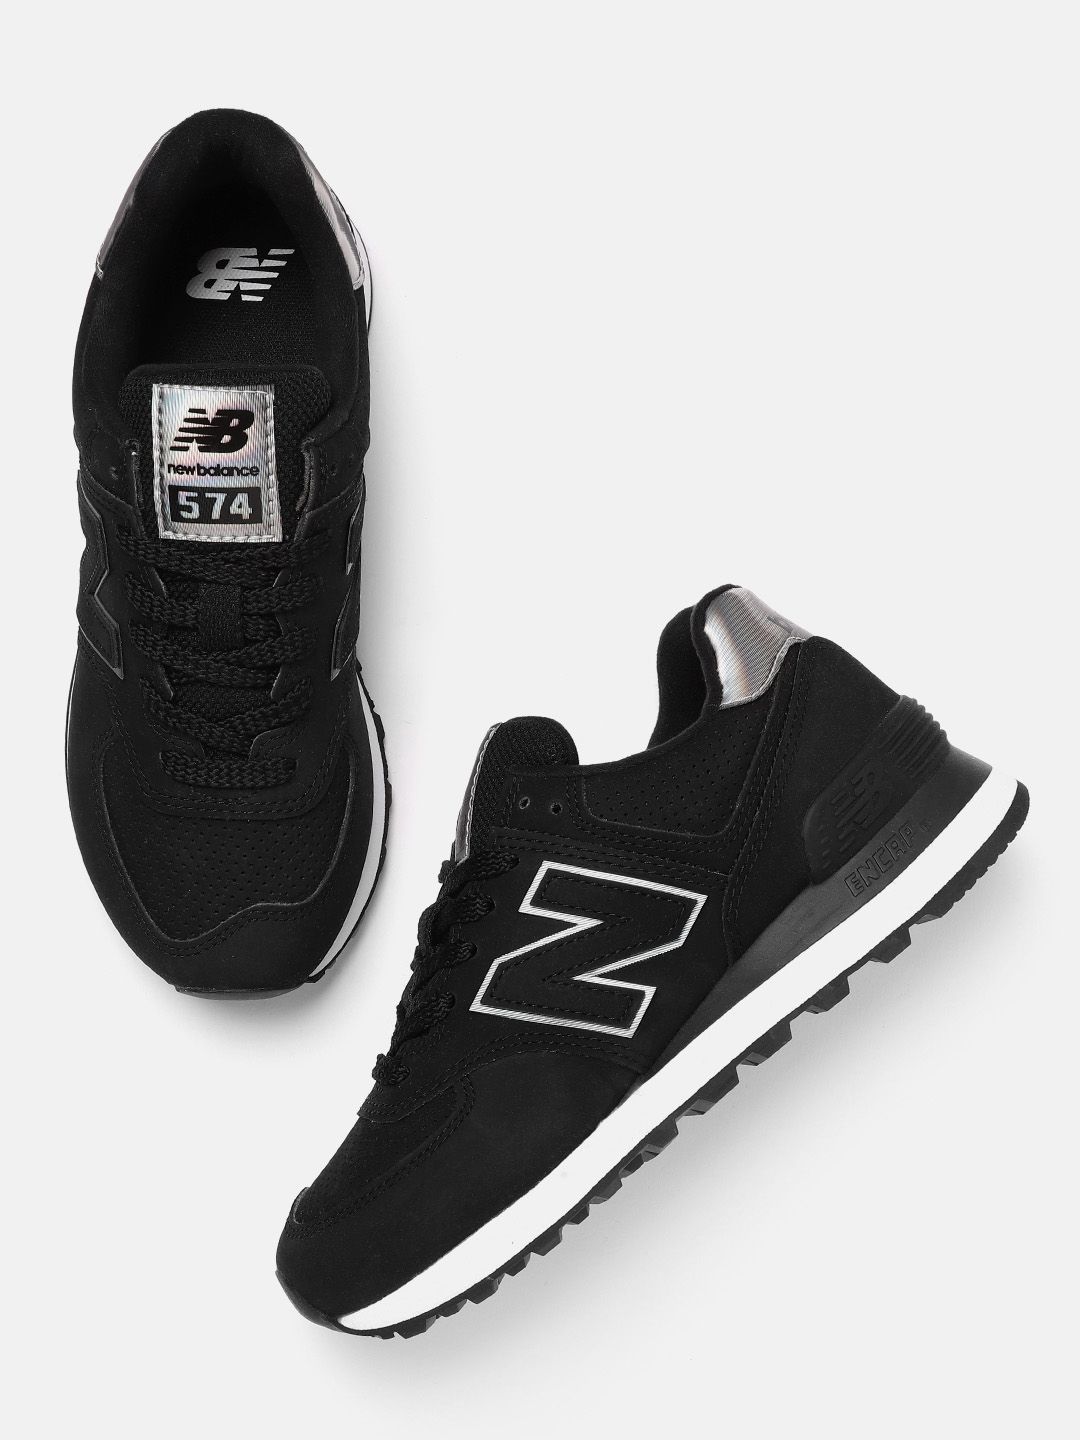 New Balance Women Black Perforated Sneakers Price in India